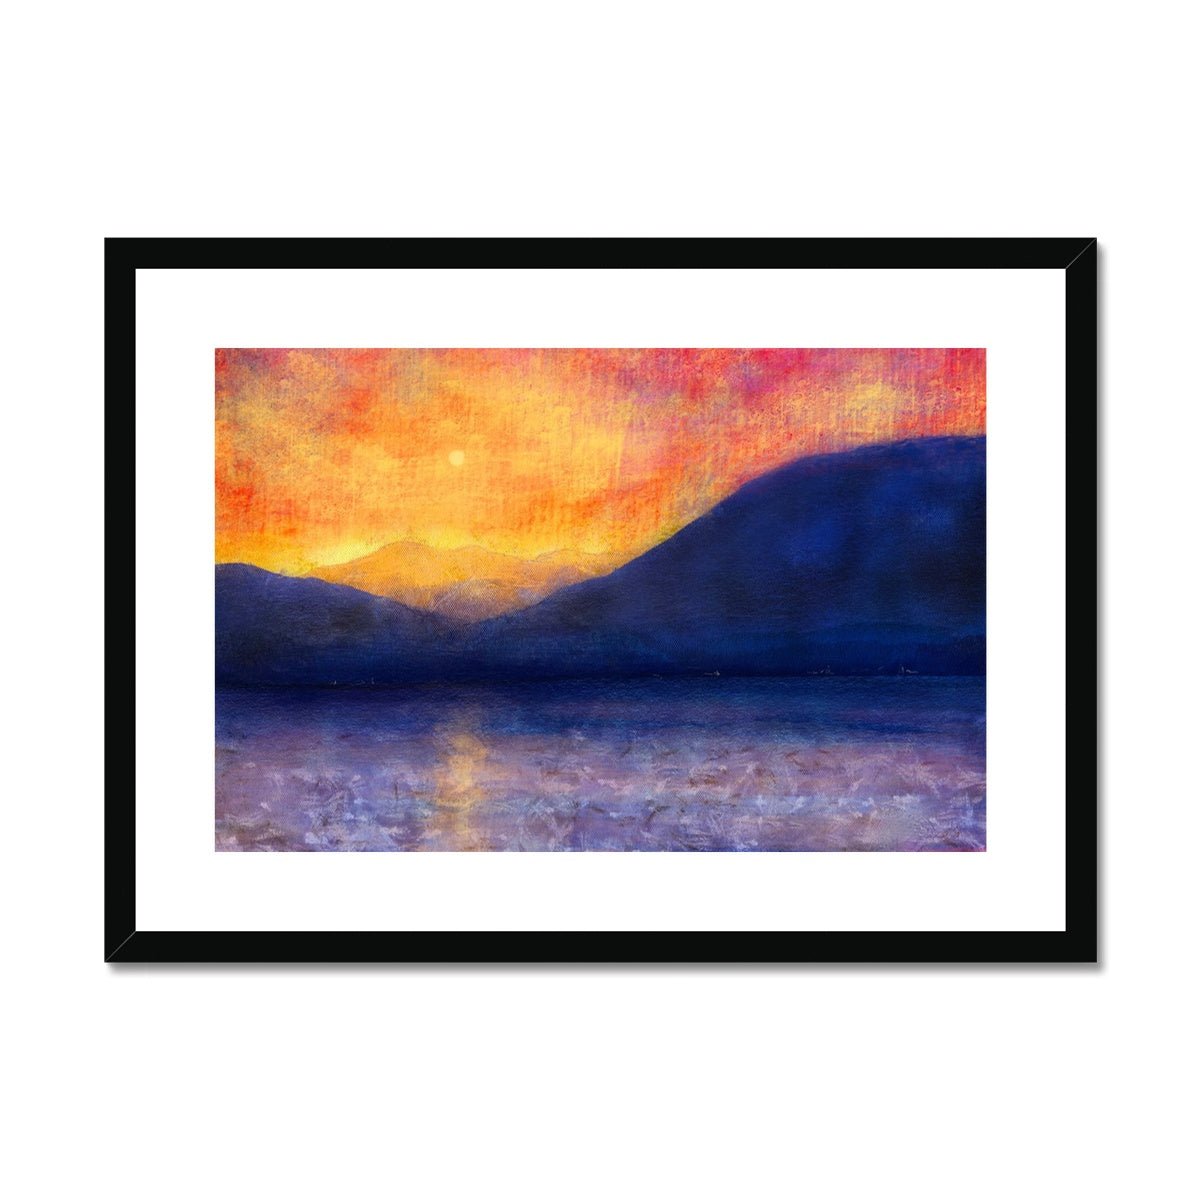 Sunset Approaching Mull Painting | Framed & Mounted Prints From Scotland-Framed & Mounted Prints-Hebridean Islands Art Gallery-A2 Landscape-Black Frame-Paintings, Prints, Homeware, Art Gifts From Scotland By Scottish Artist Kevin Hunter